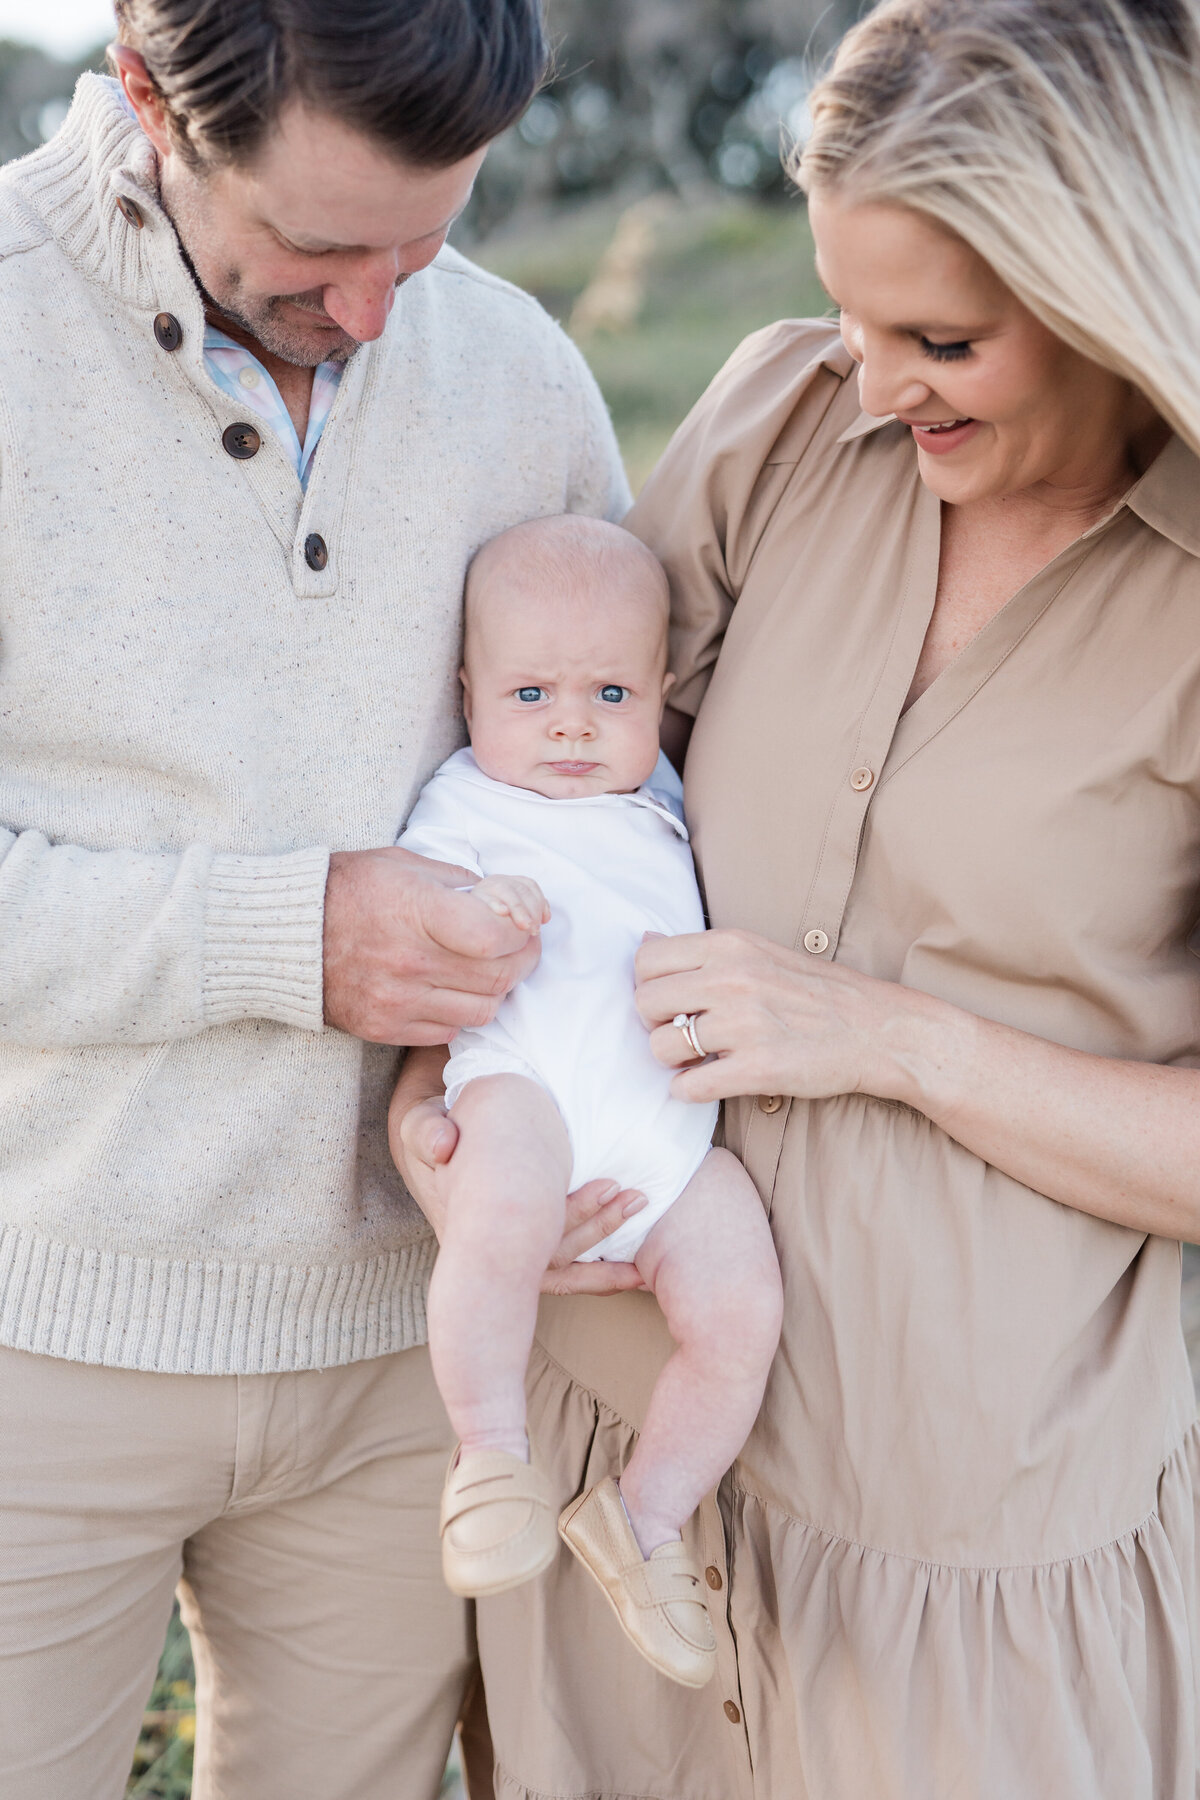 Wilmington Family Photographers | Fort Fisher Family Photo session